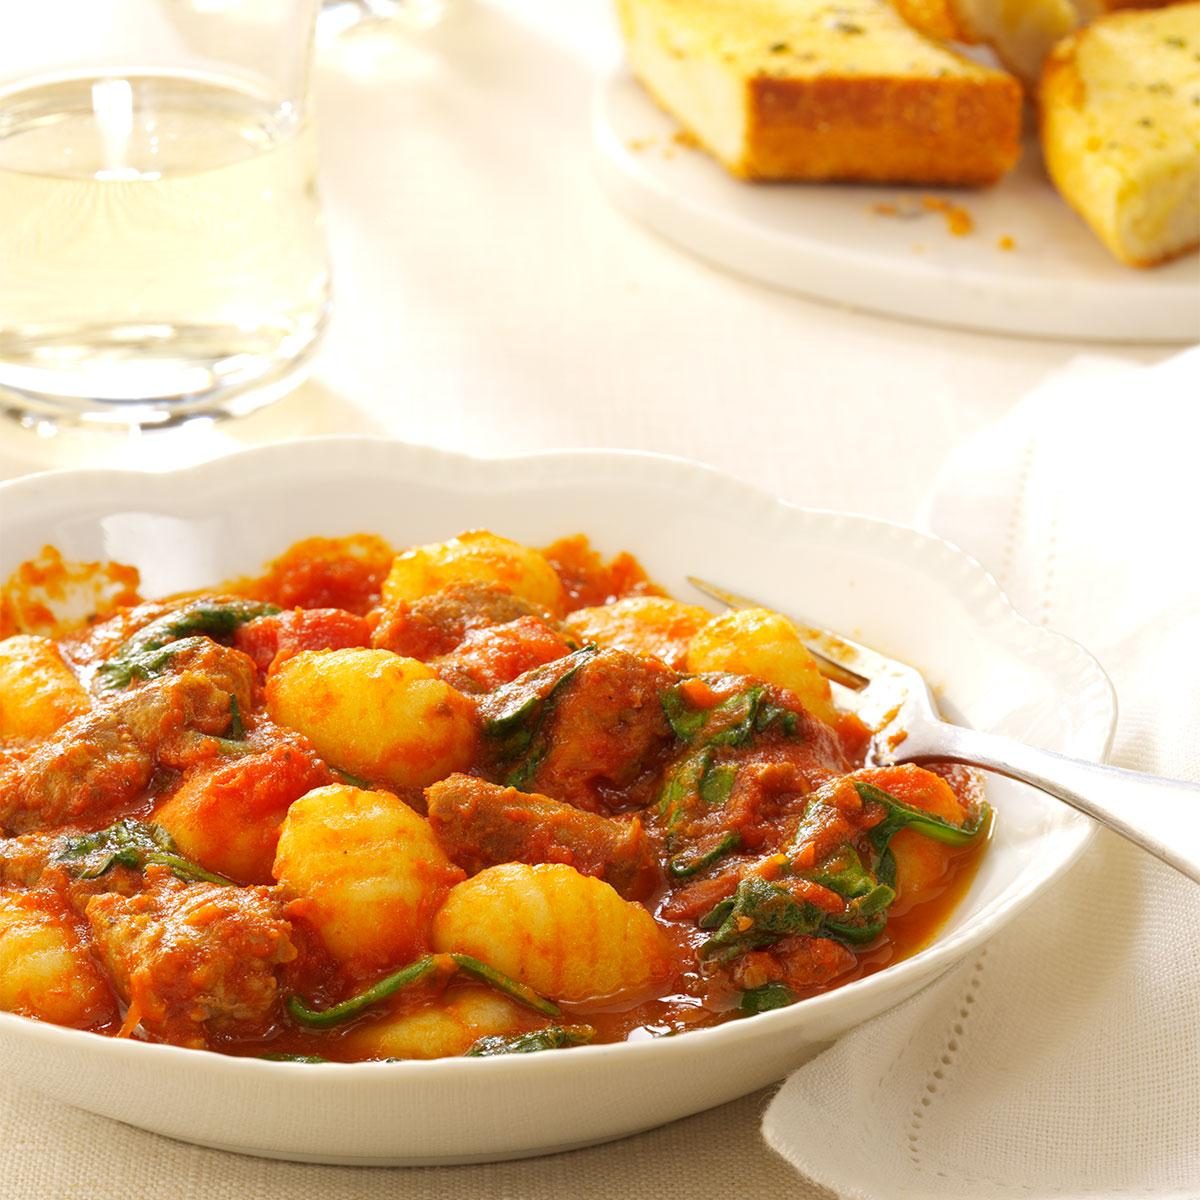 Sausage, Spinach and Gnocchi